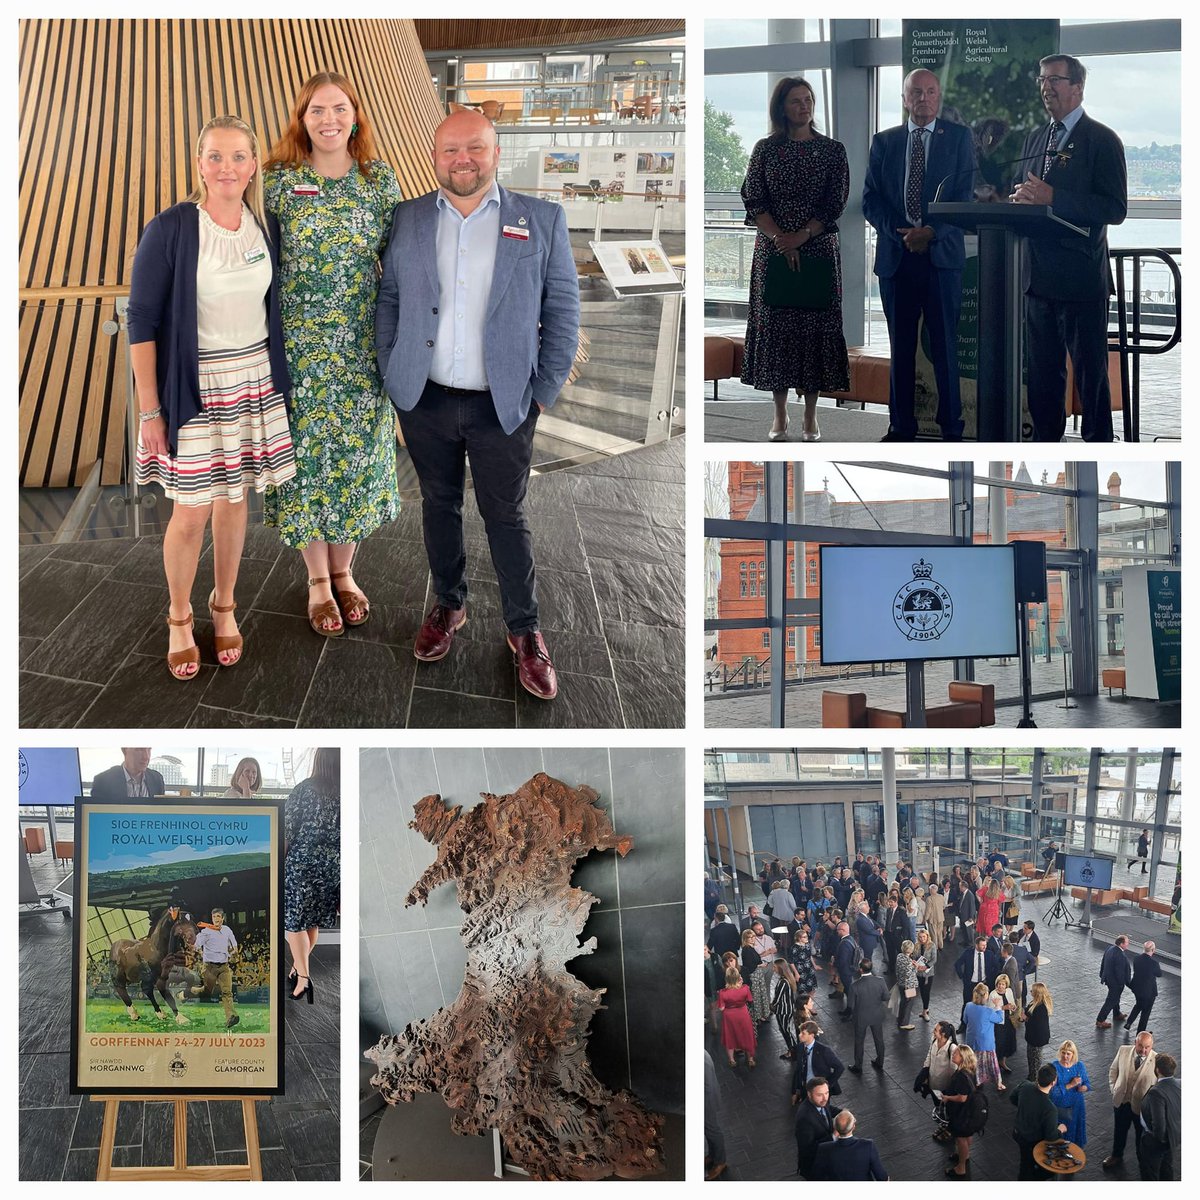 Maria  had a fantastic networking afternoon attending the 'Official Launch of  the Royal Welsh Show' and learning about all the exciting plans Royal Welsh Agricultural Society and @GlamorganRwas Feature County 2023 have been up to... count down is on 
👏🐏👩‍👩‍👧‍👦🐄@royalwelshshow